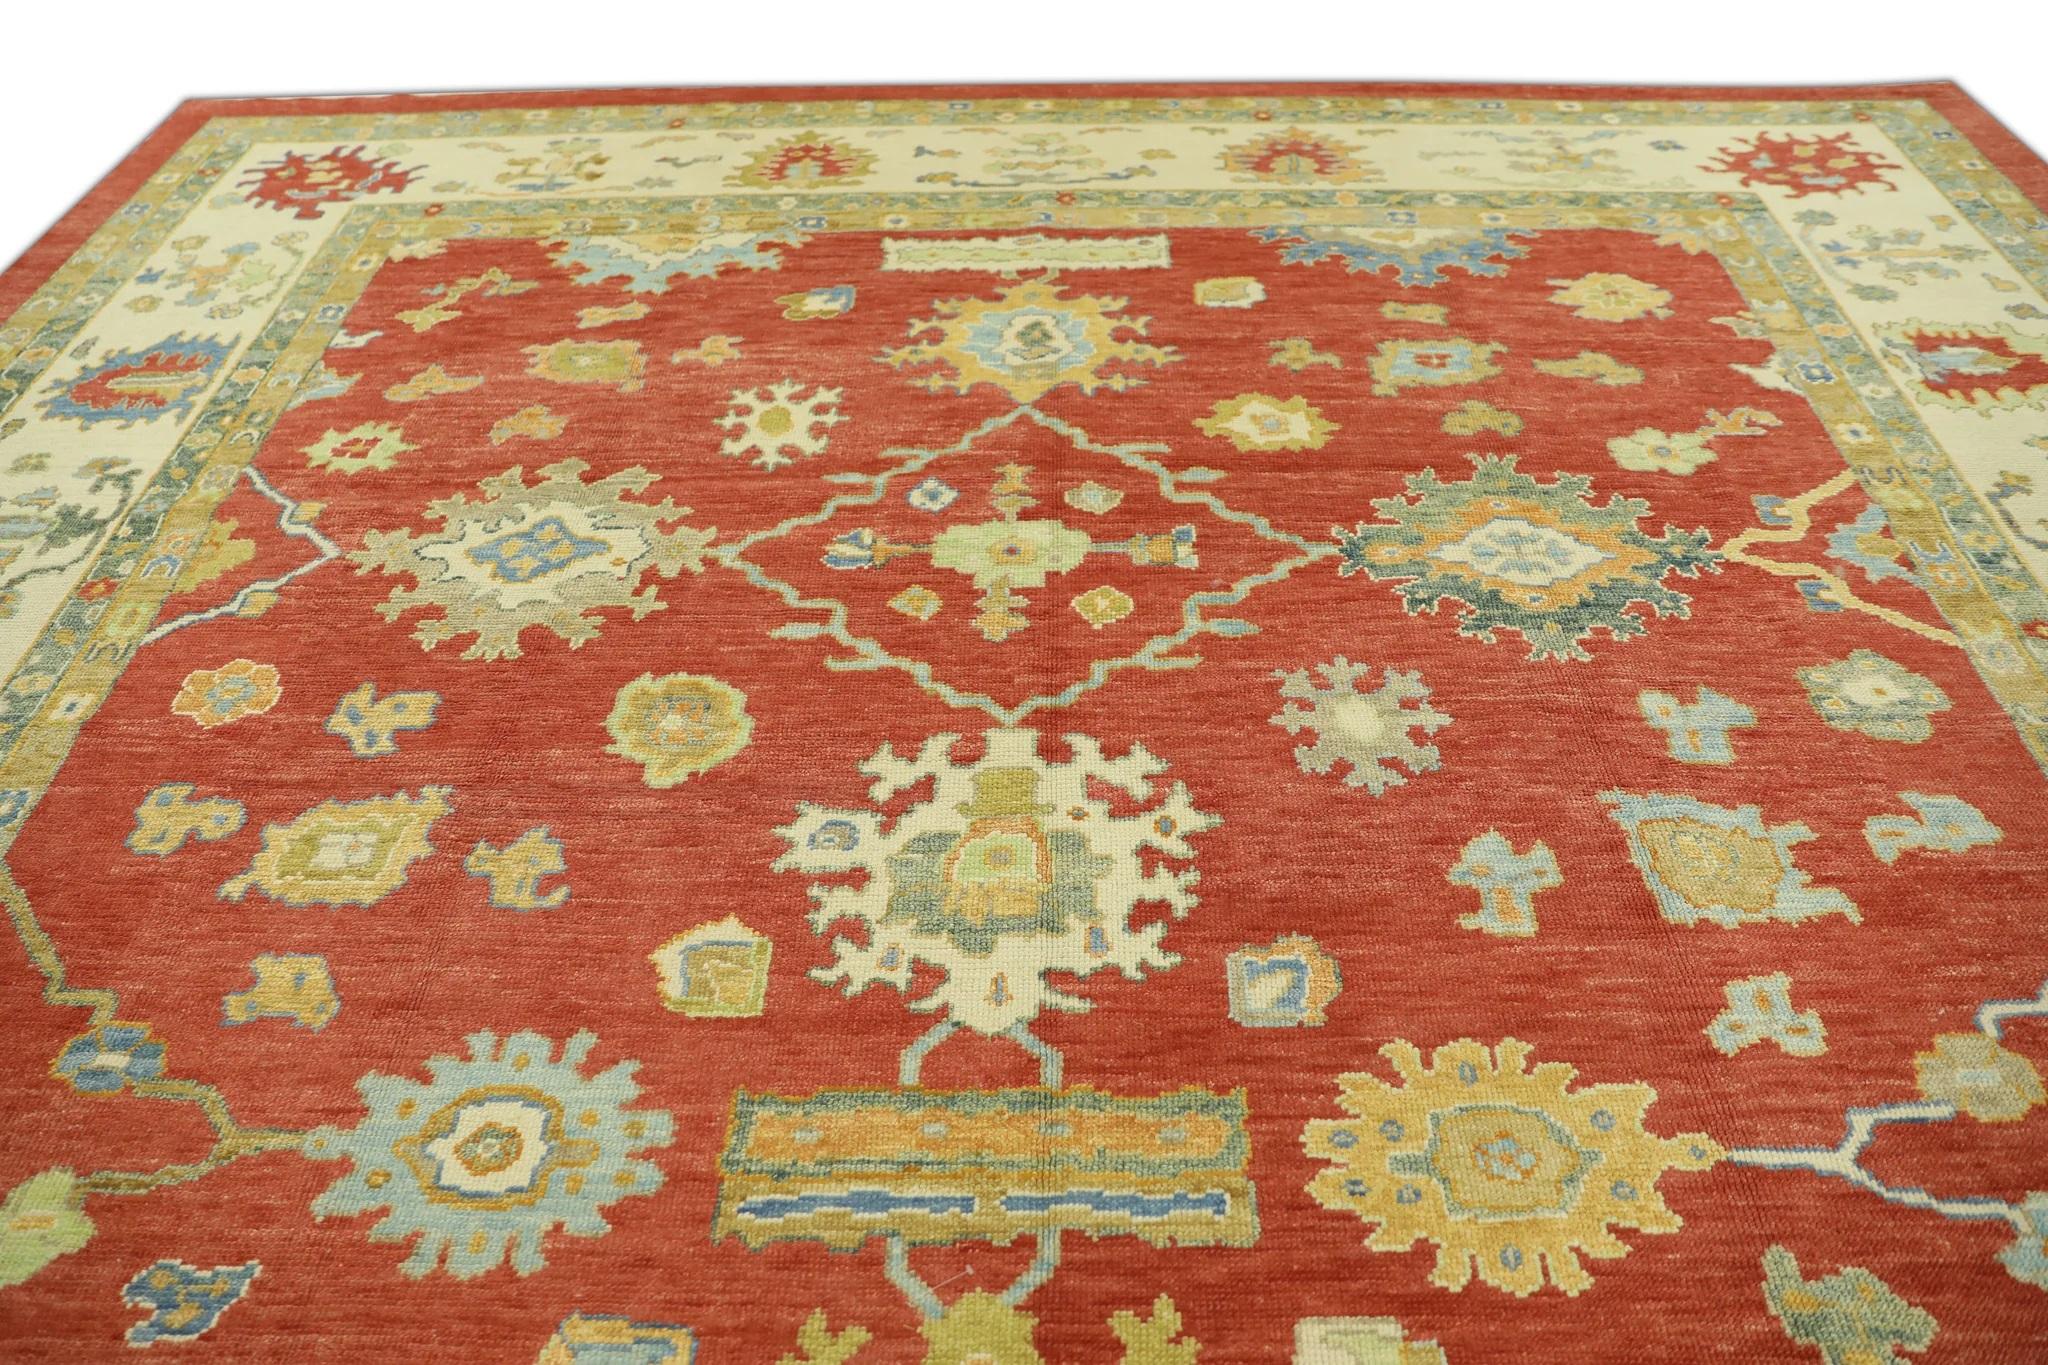 Contemporary Red & Green Handwoven Wool Turkish Oushak Rug 12' x 14'11